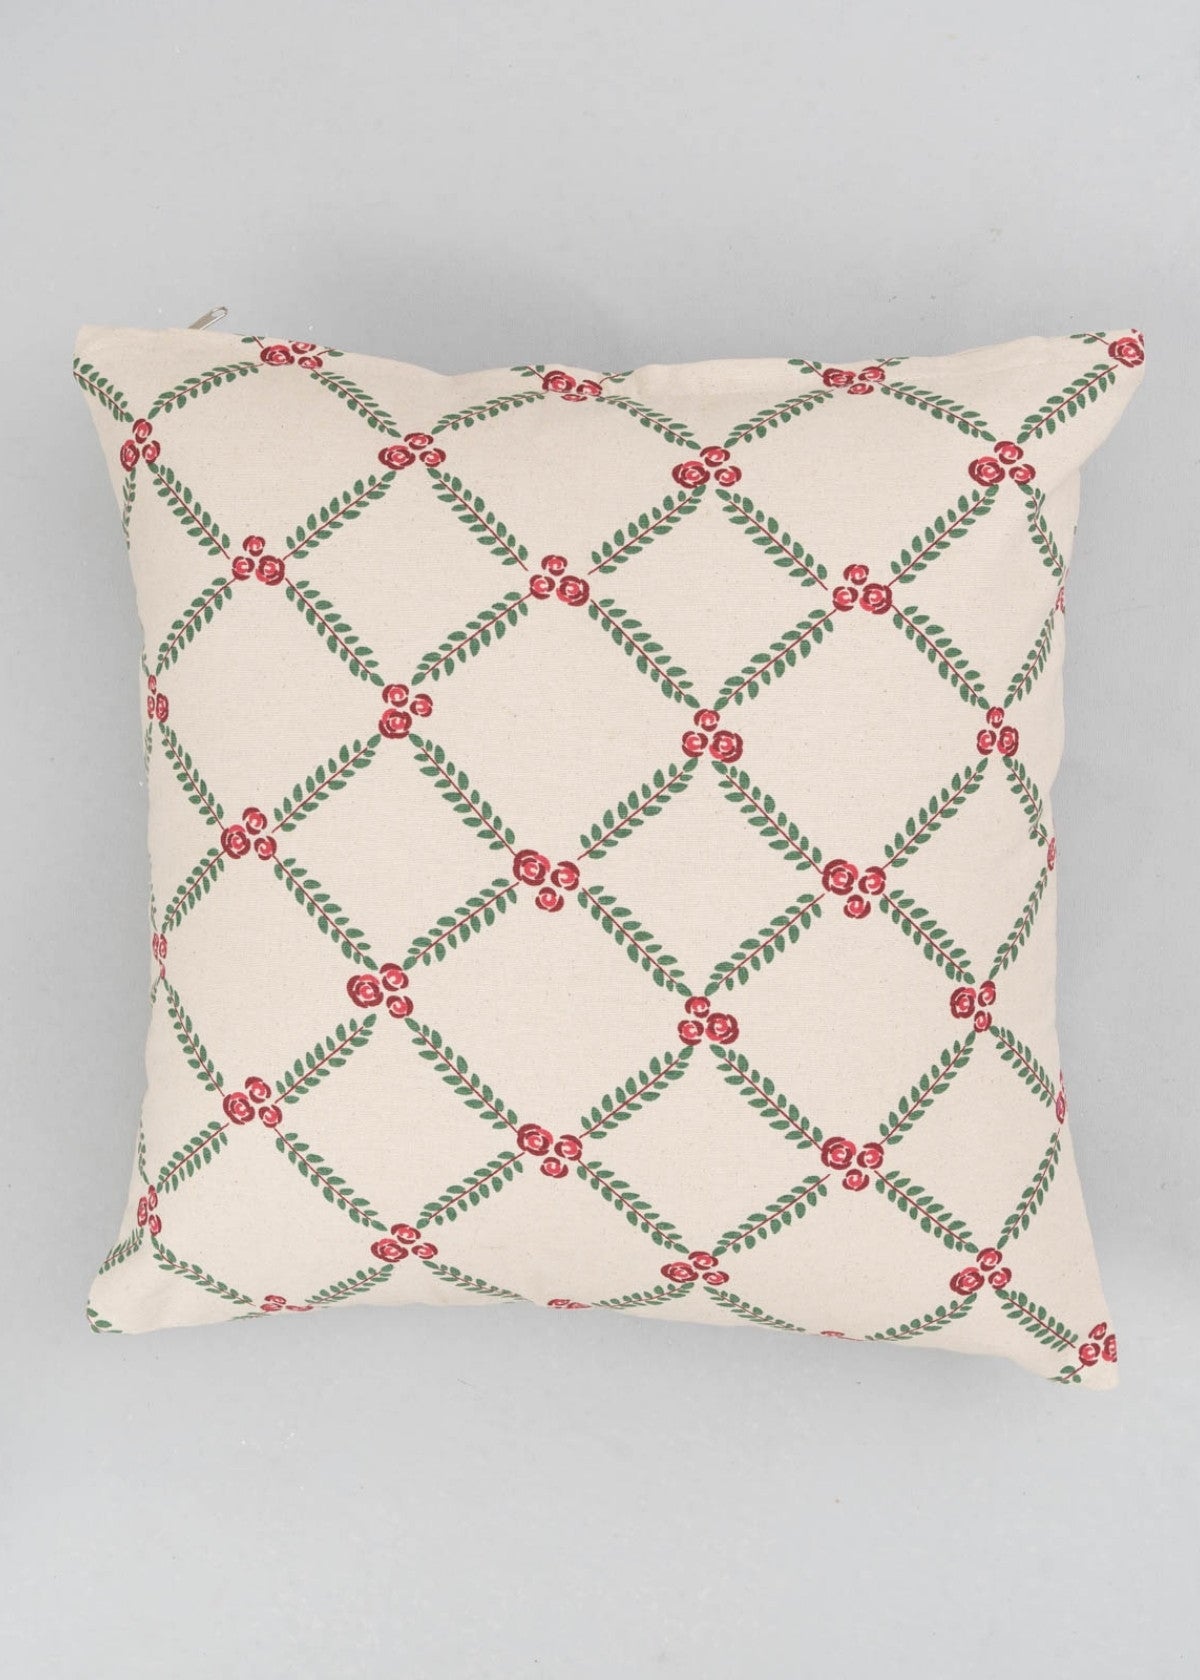 Climbing Roses Printed Cotton Cushion Cover - Wine Red